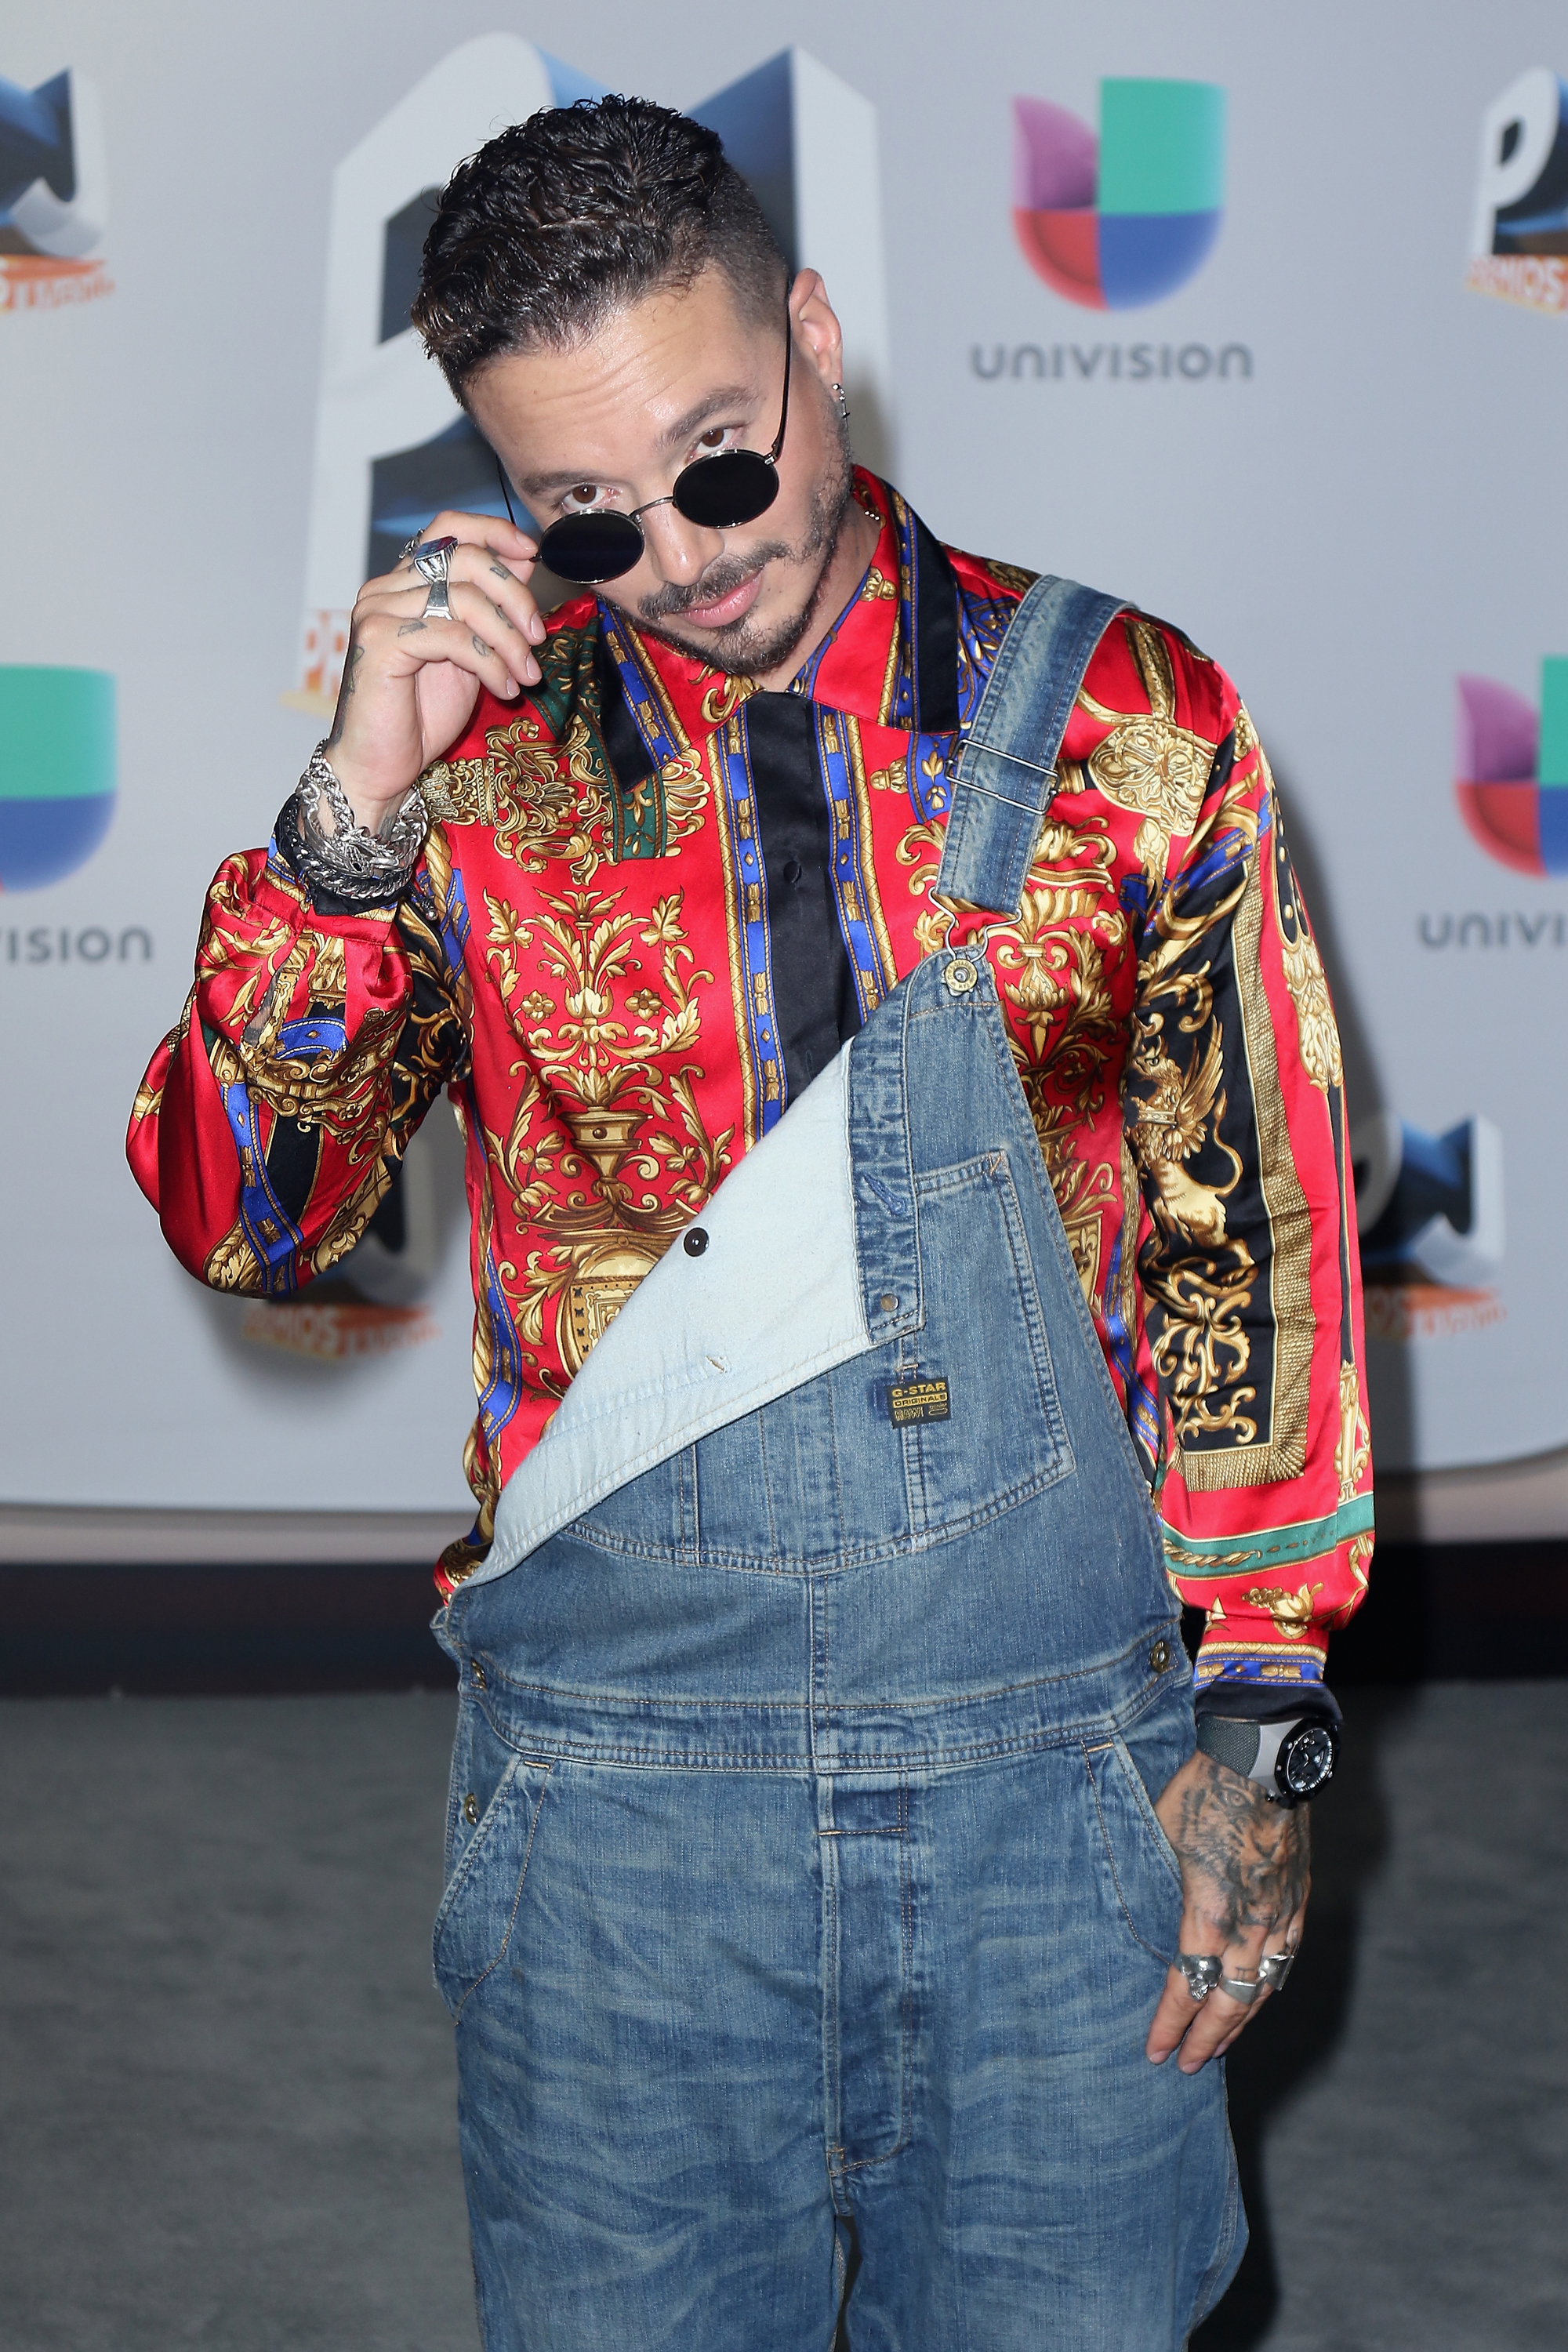 MIAMI, FL - JULY 14: Singer J Balvin attends the Univision's 13th Edition Of Premios Juventud Youth Awards at Bank United Center on July 14, 2016 in Miami, Florida. John Parra/Getty Images for Univision/AFP